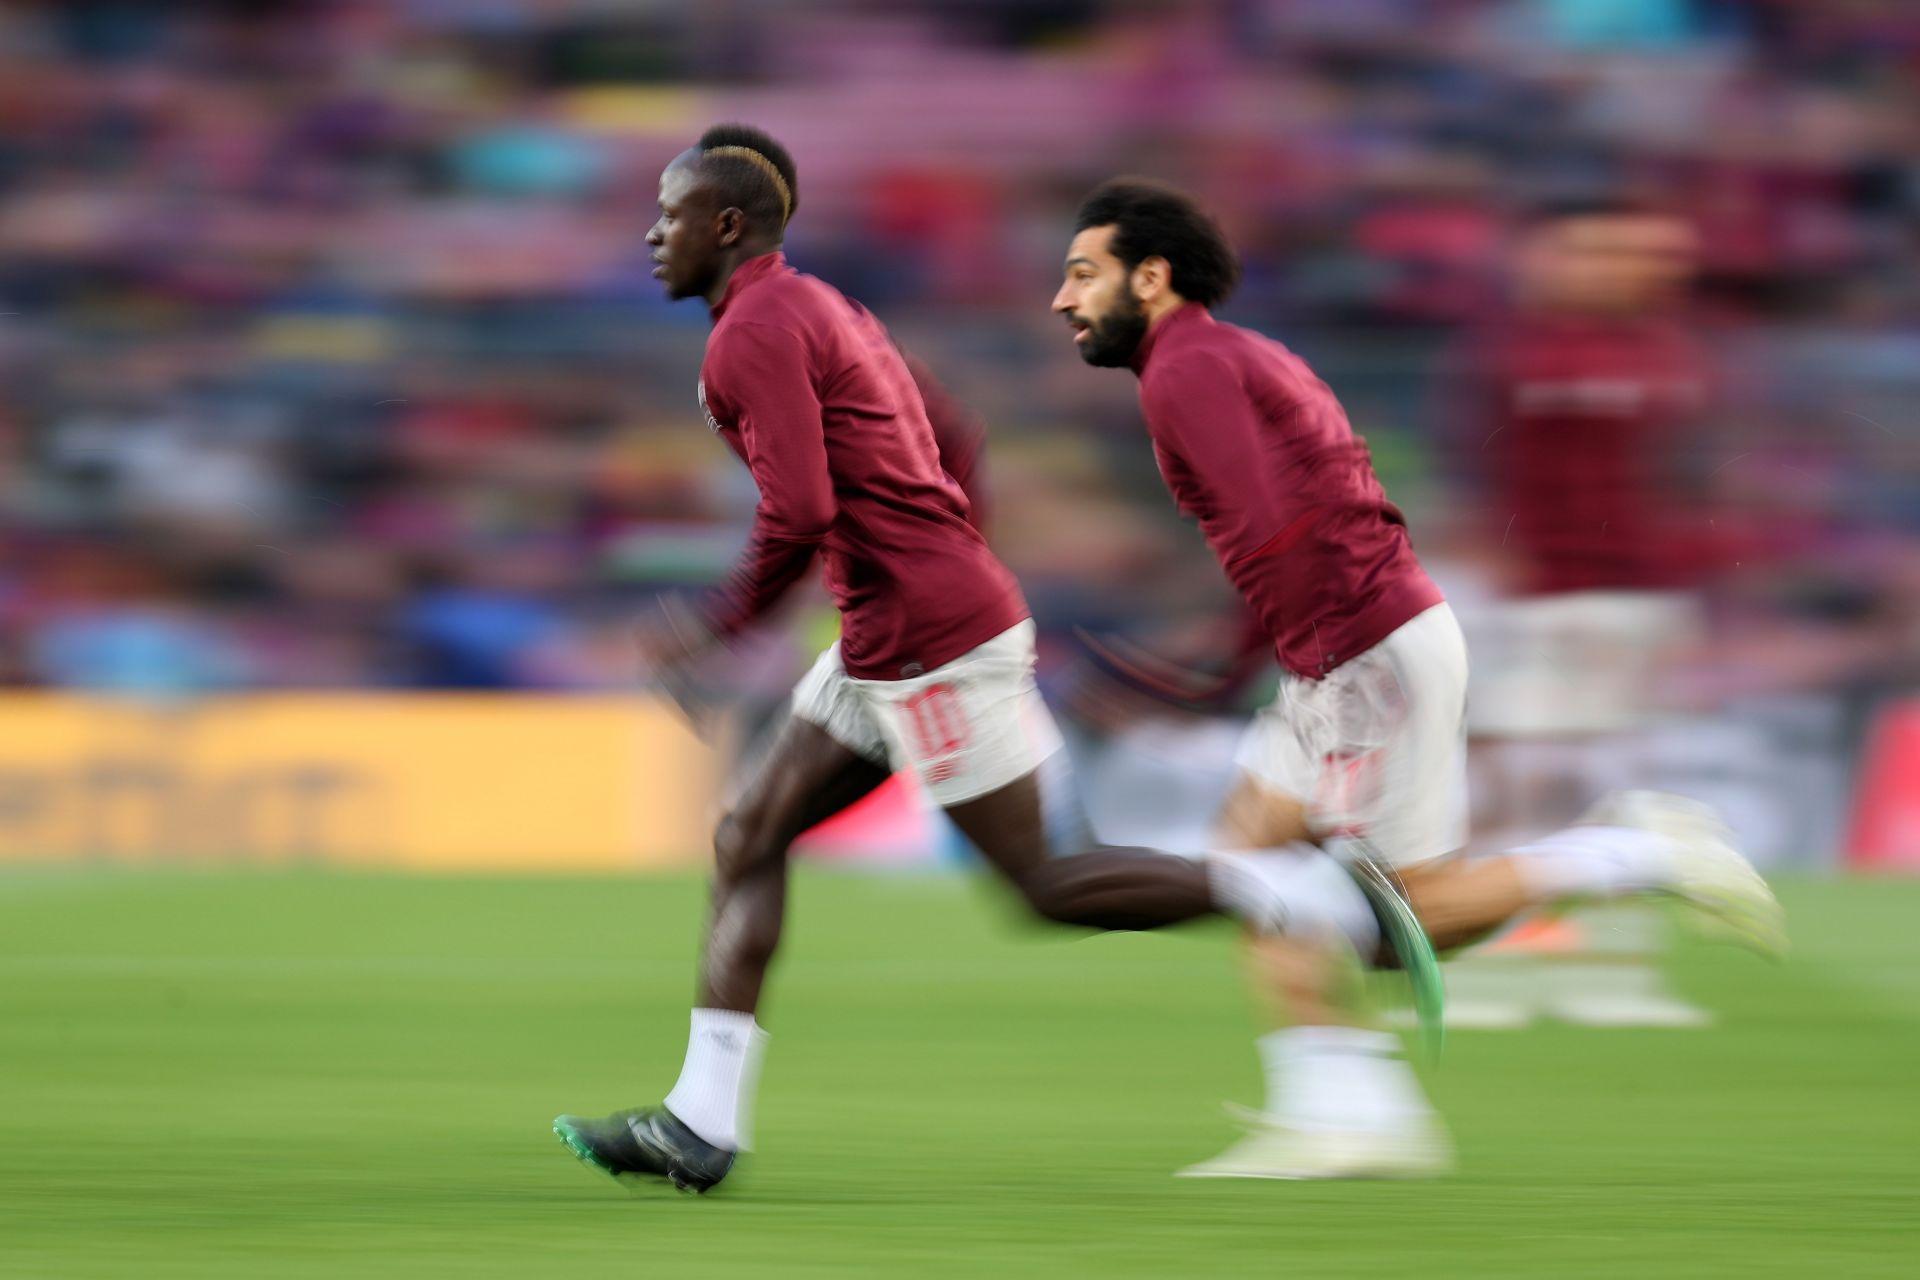 Mane (left) and Salah (right) have swept teams away for Liverpool this campaign.